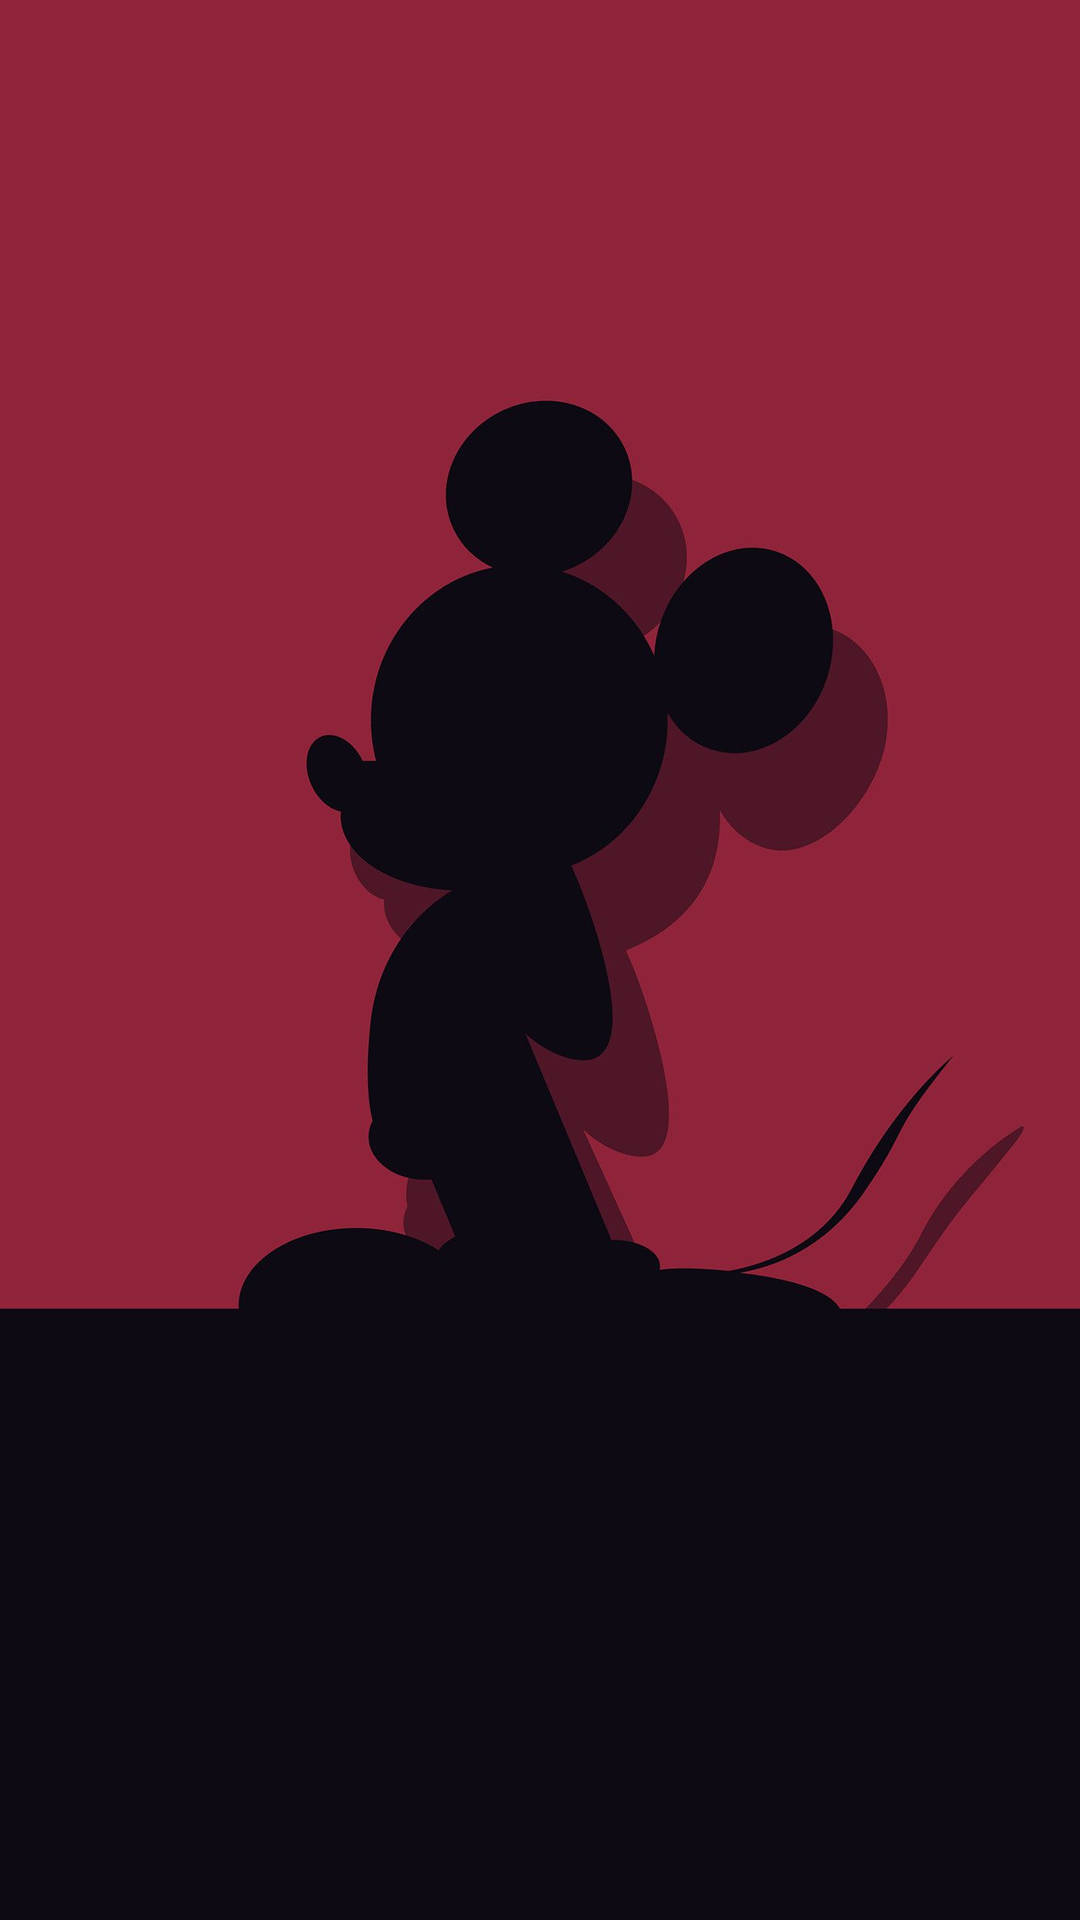 Mickey Mouse showing his fun-loving spirit in Red & Black Wallpaper